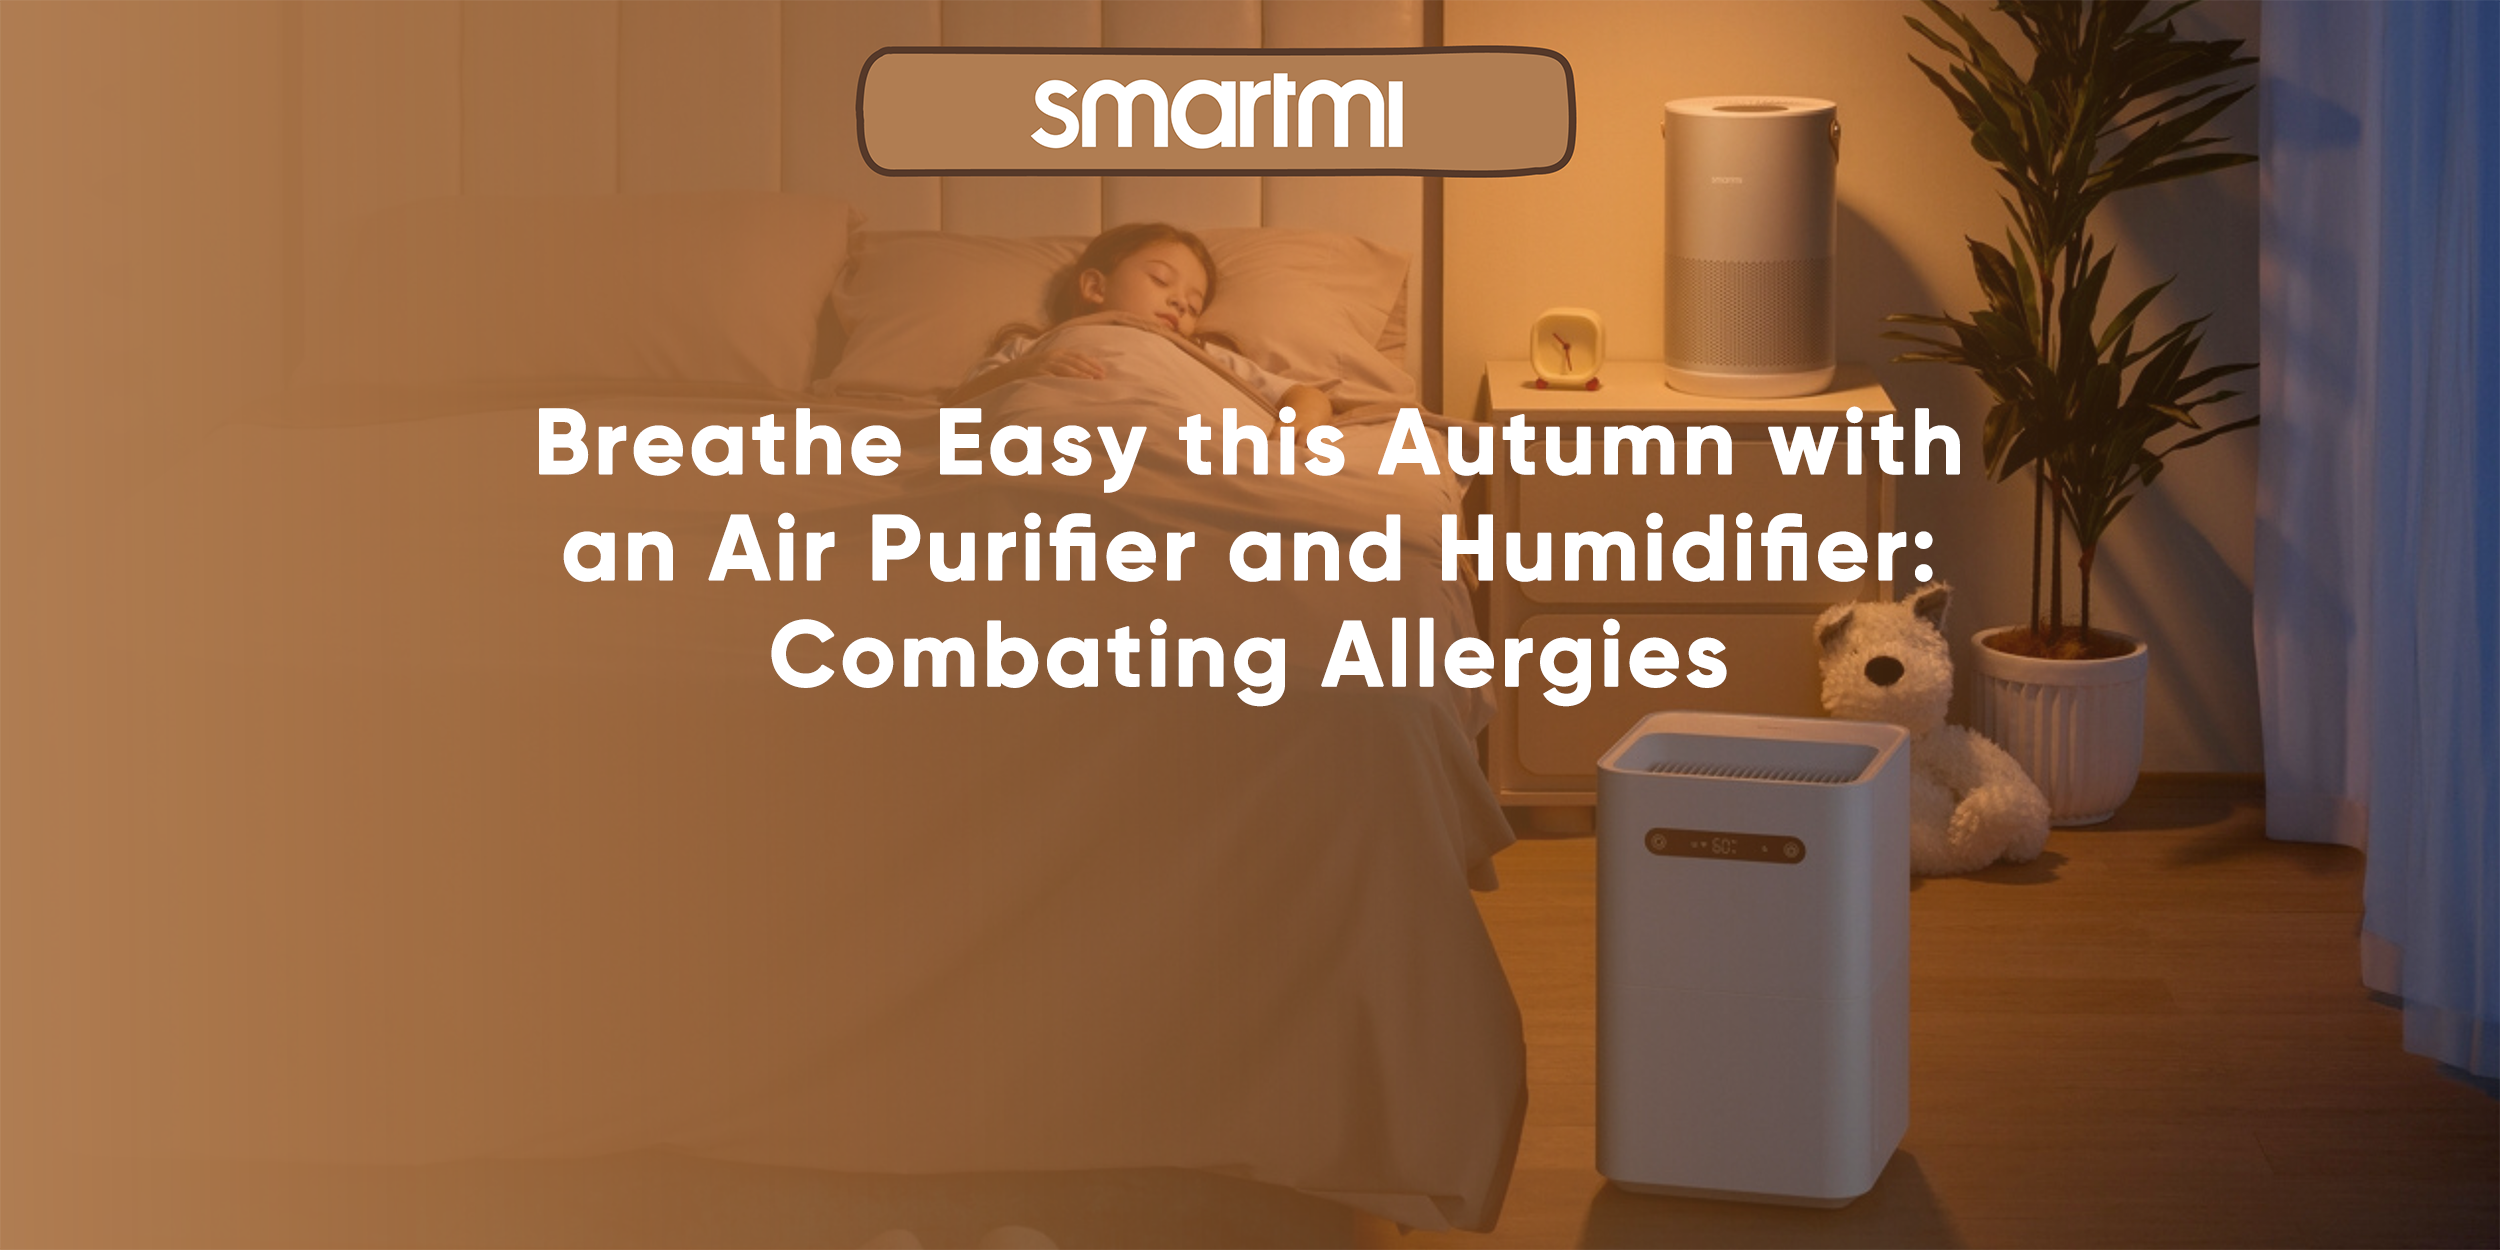 Breathe Easy this Autumn with an Air Purifier and Humidifier: Combating Allergies